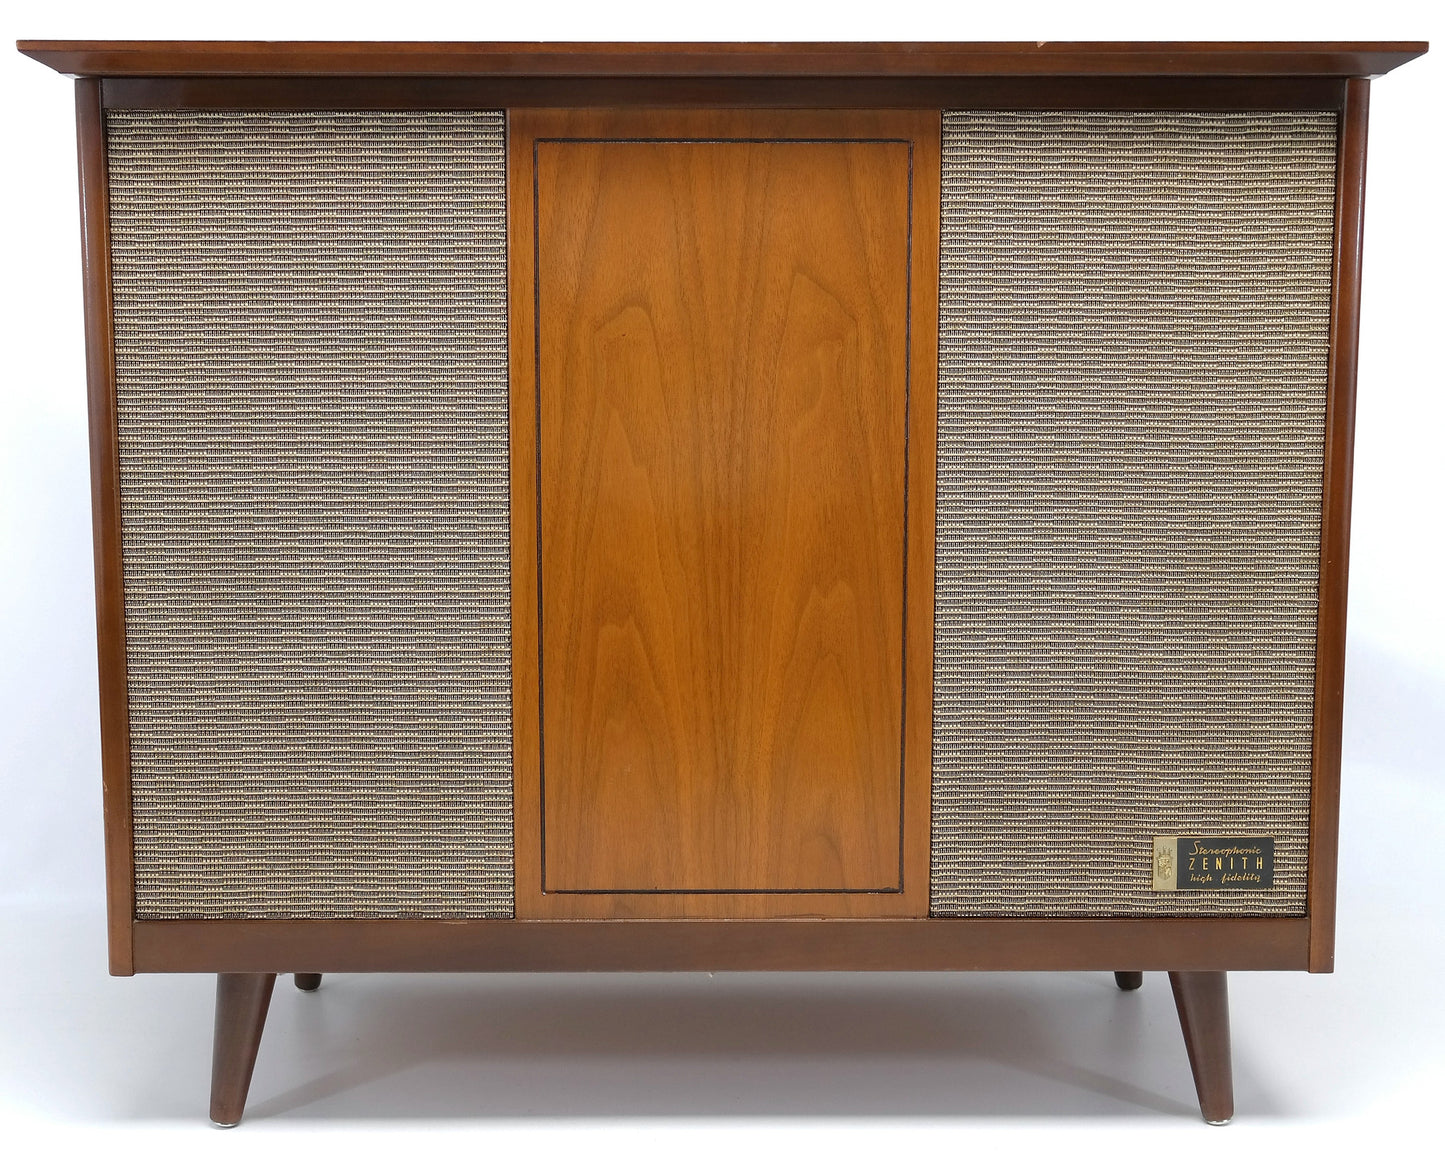 Mid Century Modern Zenith STEREO CONSOLE- 60's - Record Player - Bluetooth - AM FM Tuner The Vintedge Co.